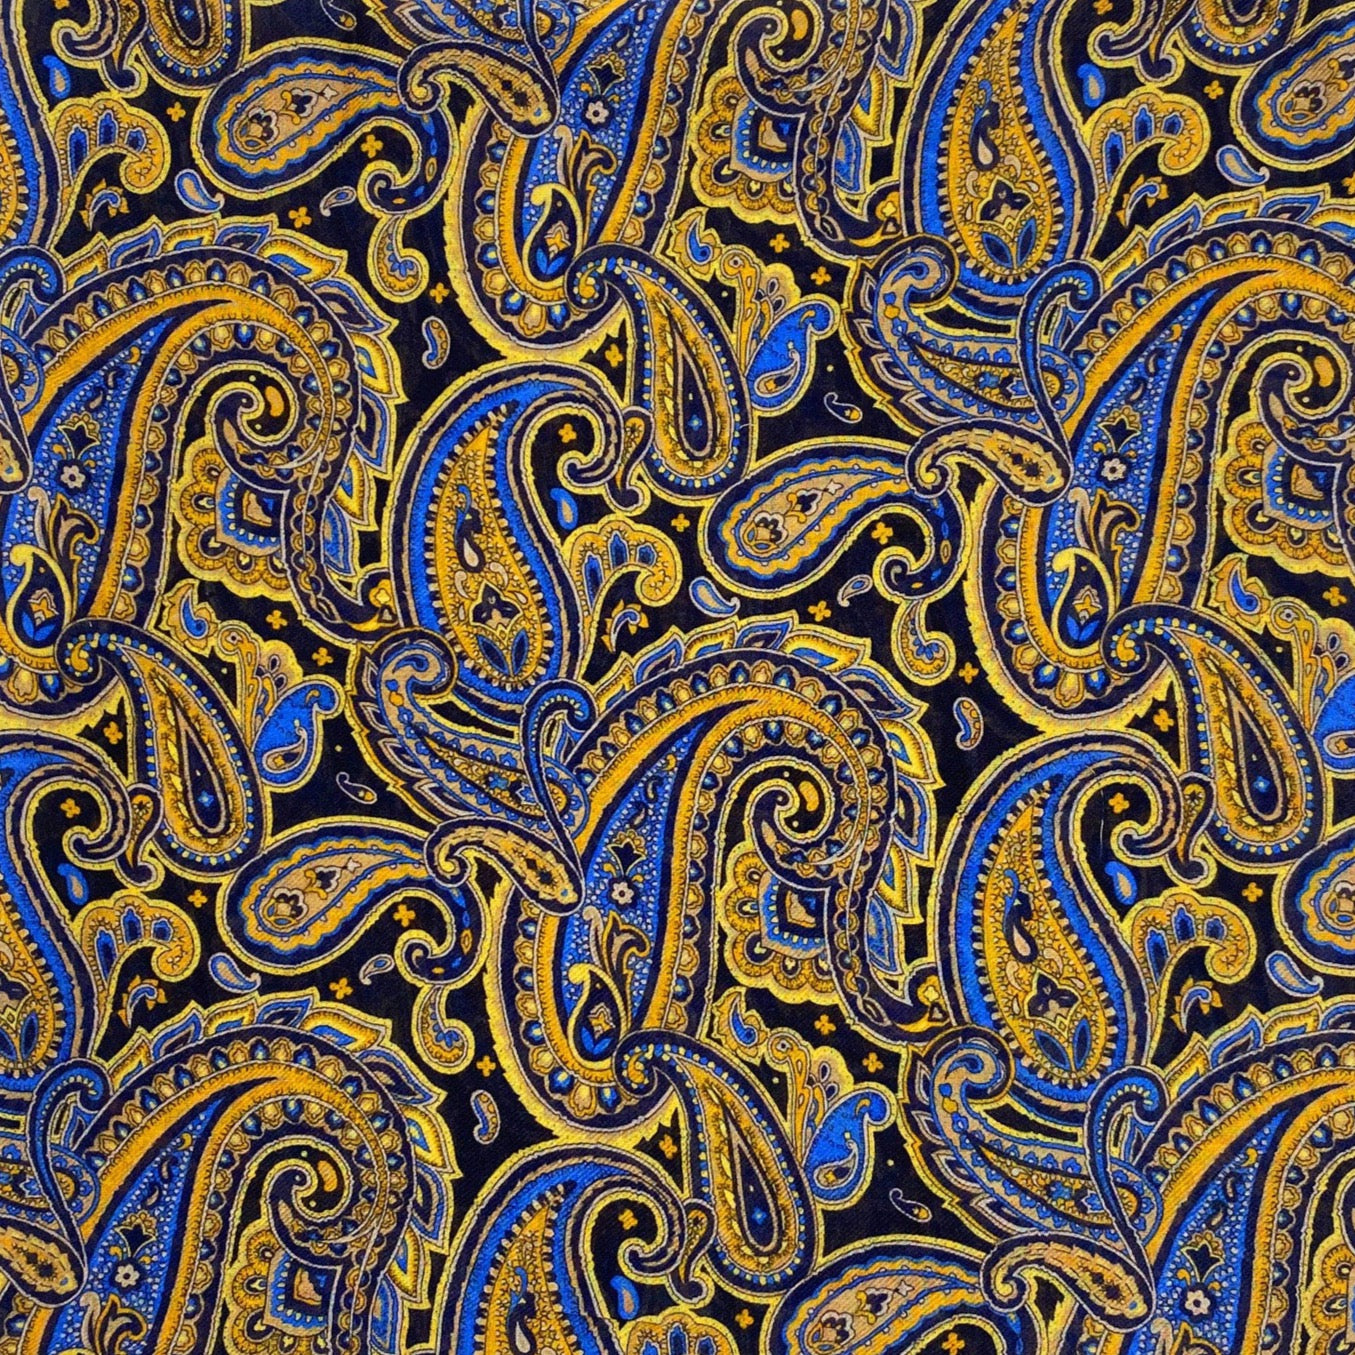 A flat, folded view of 'The Ormond' boho wide scarf. Clearly showing the intricate paisley patterns in blue, yellow and gold on a black background.